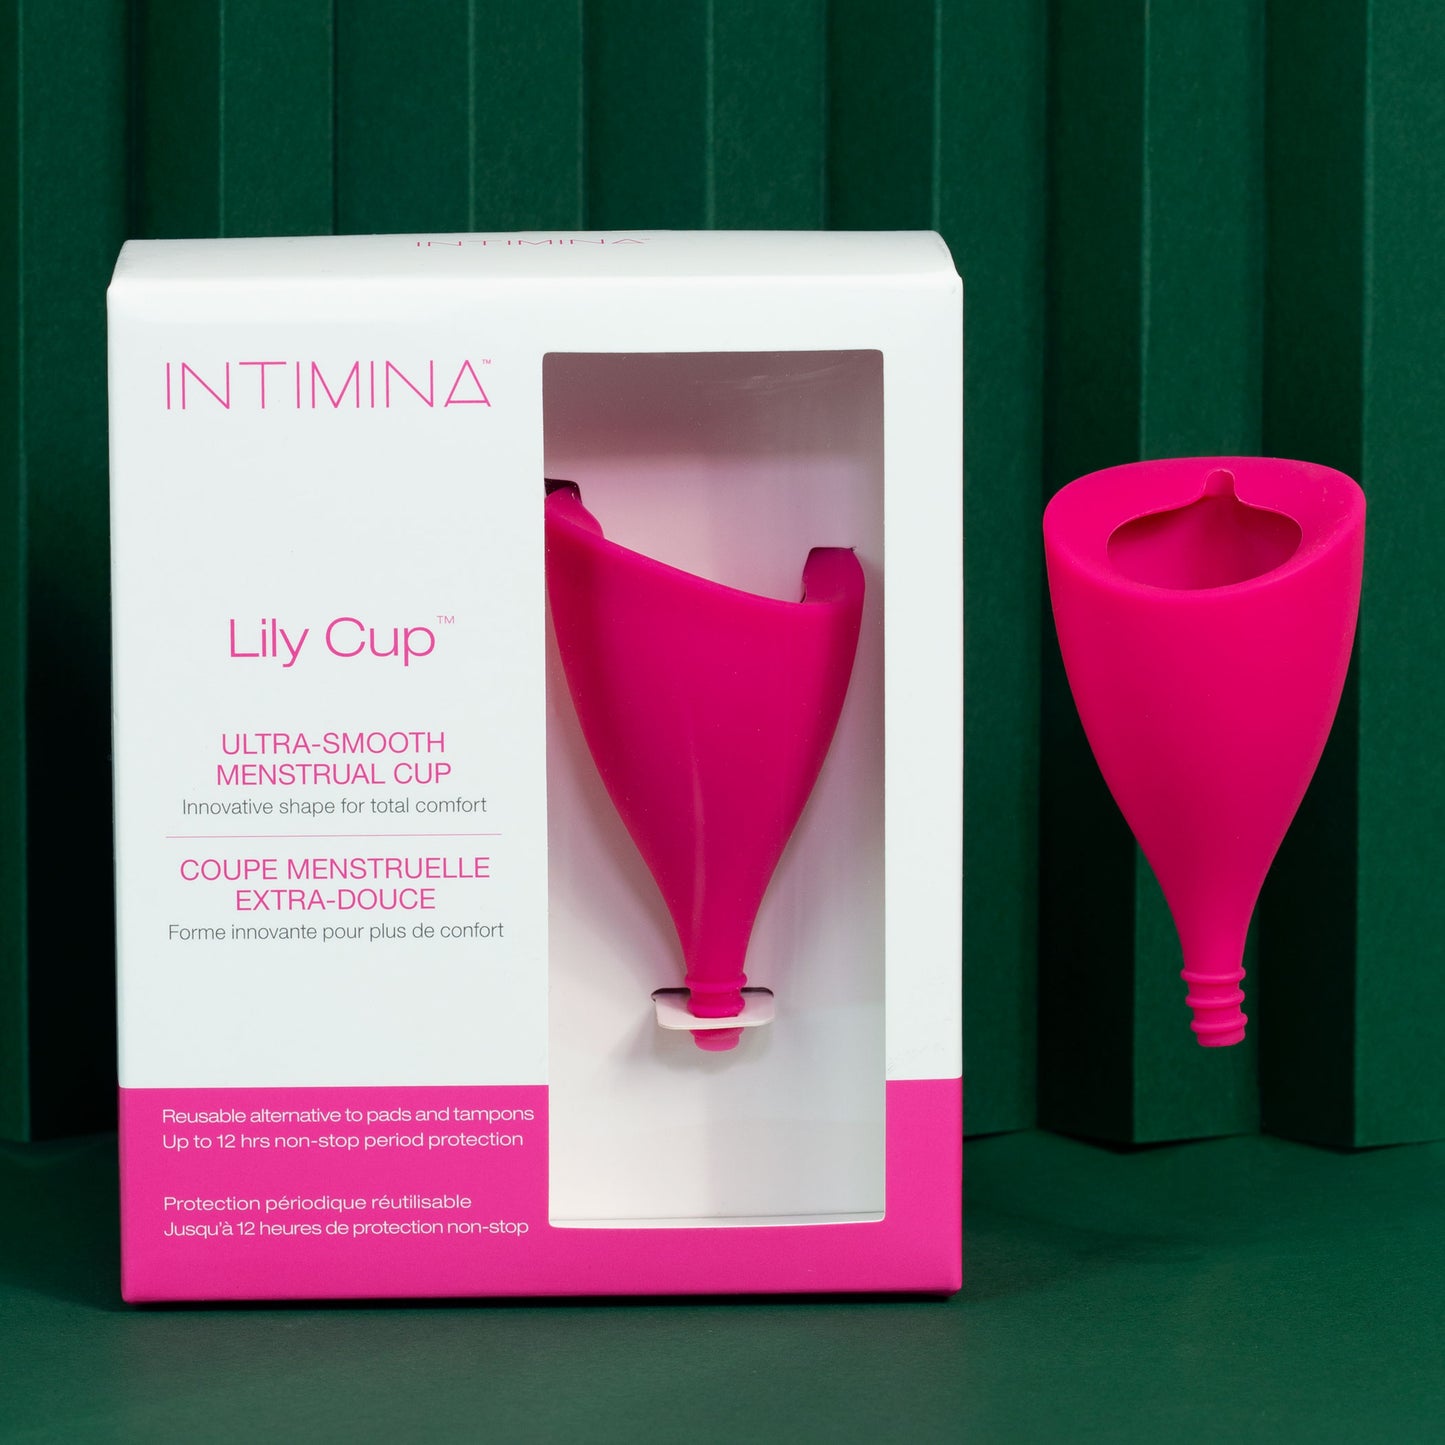 Intimina Lily Cup Size B packaging